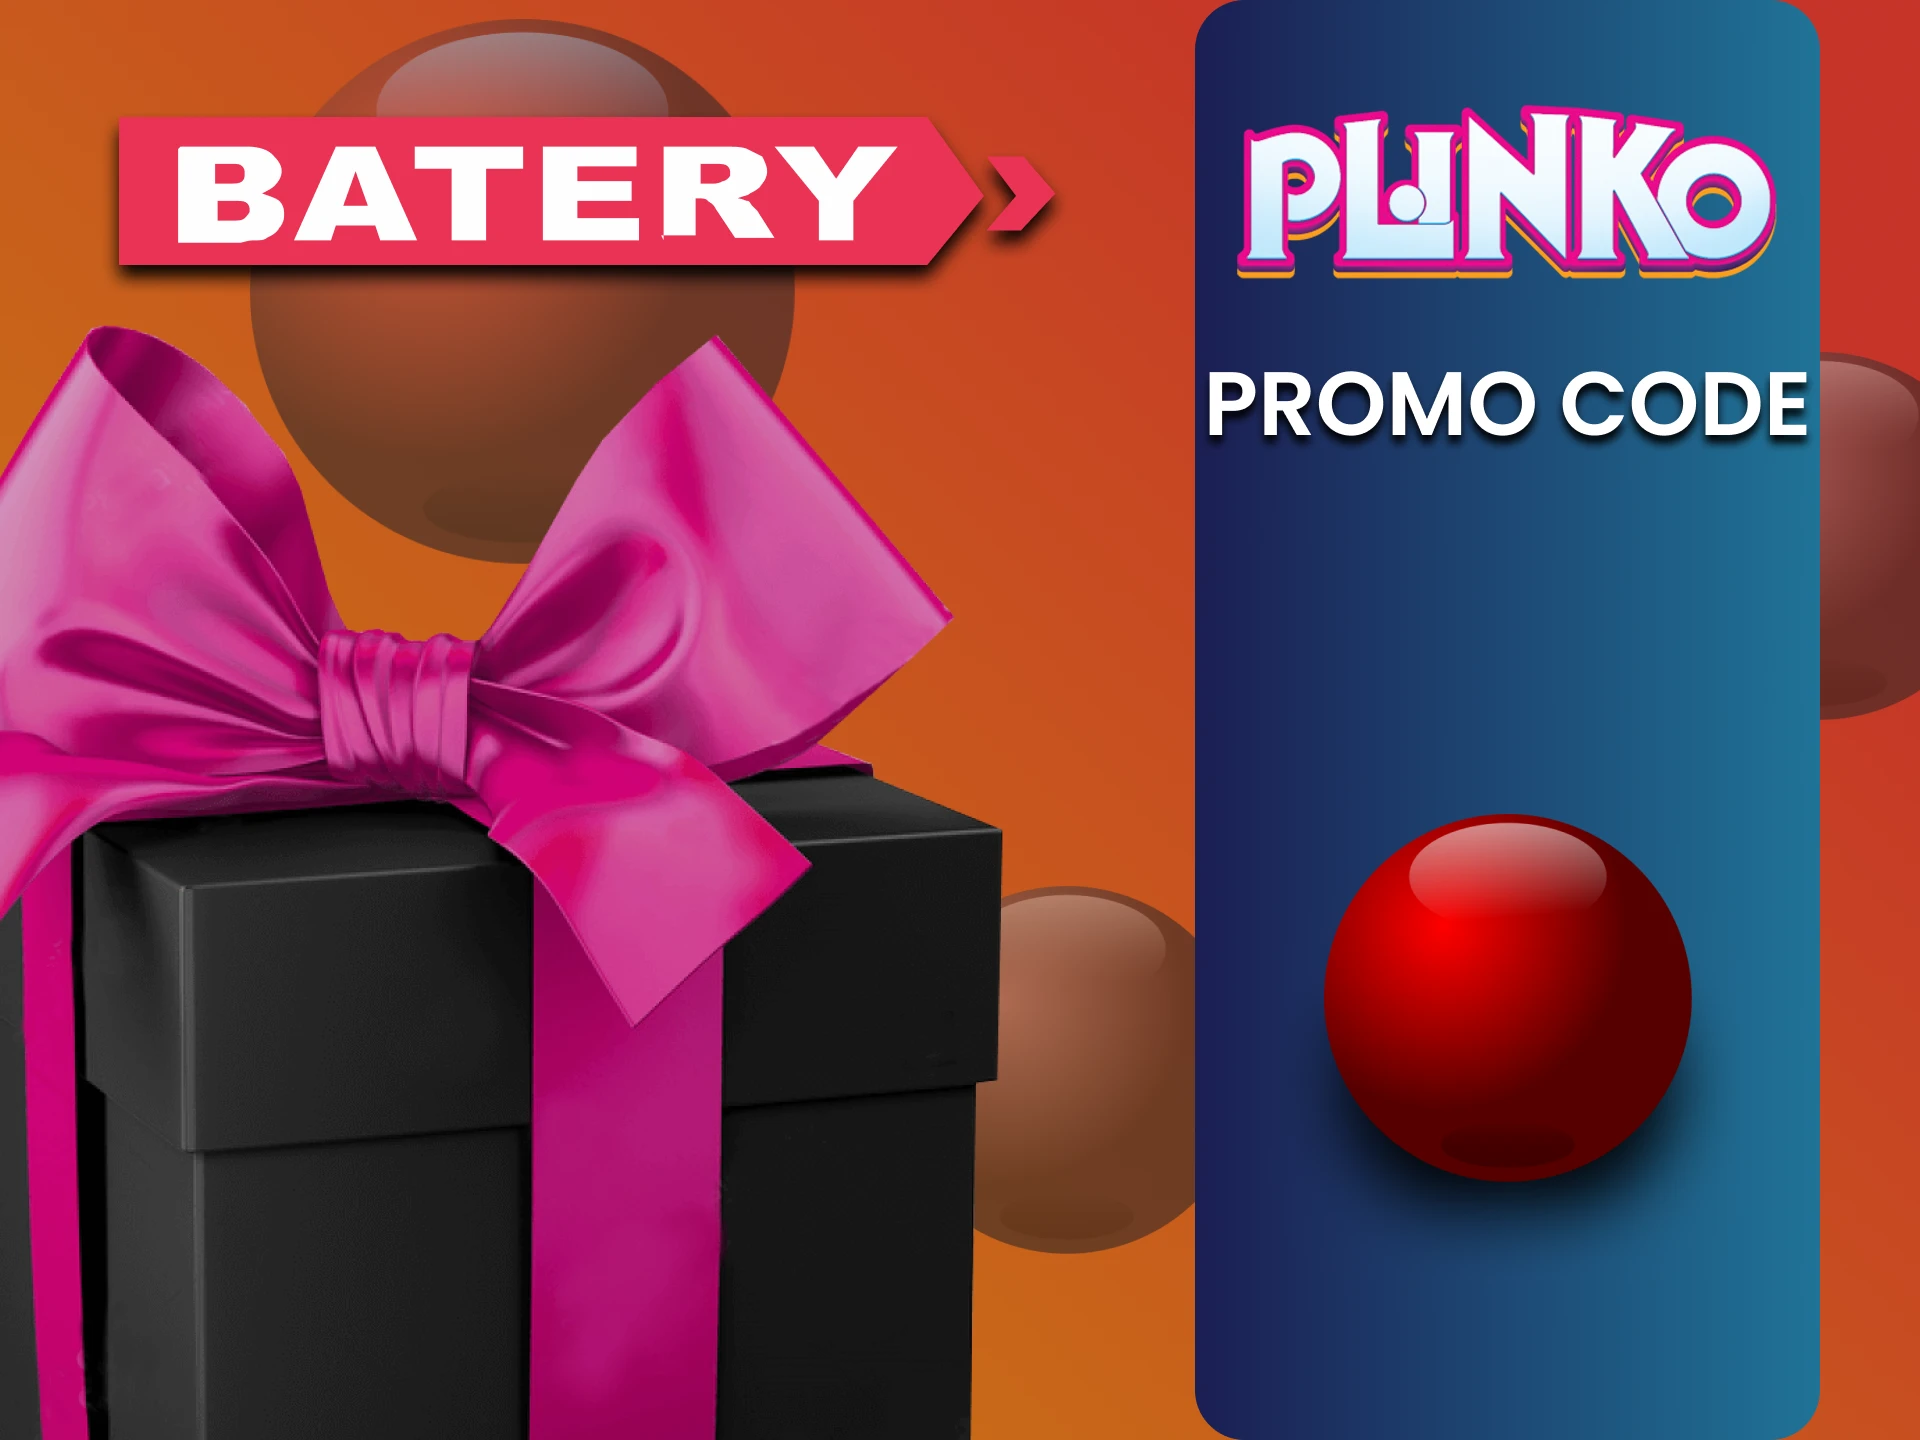 Use promo code from Batery to play Plinko.